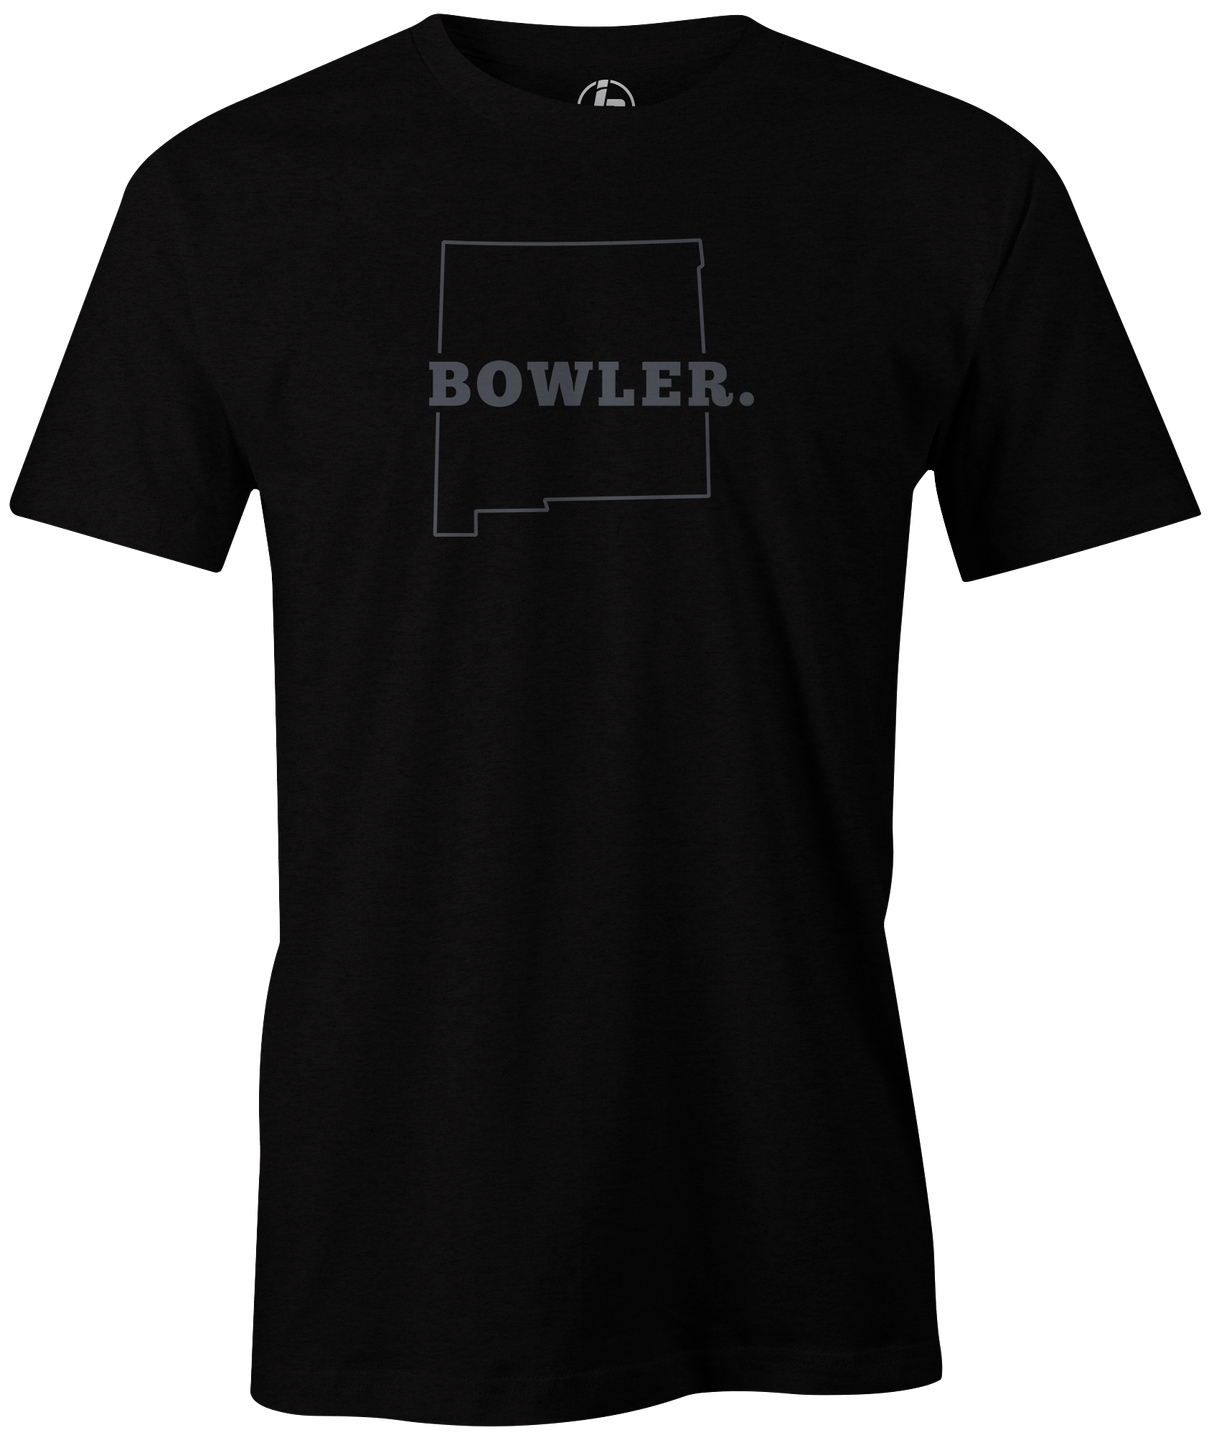 New Mexico State Men's Bowling T-shirt, Black, Cool, novelty, tshirt, tee, tee-shirt, tee shirt, teeshirt, team, comfortable